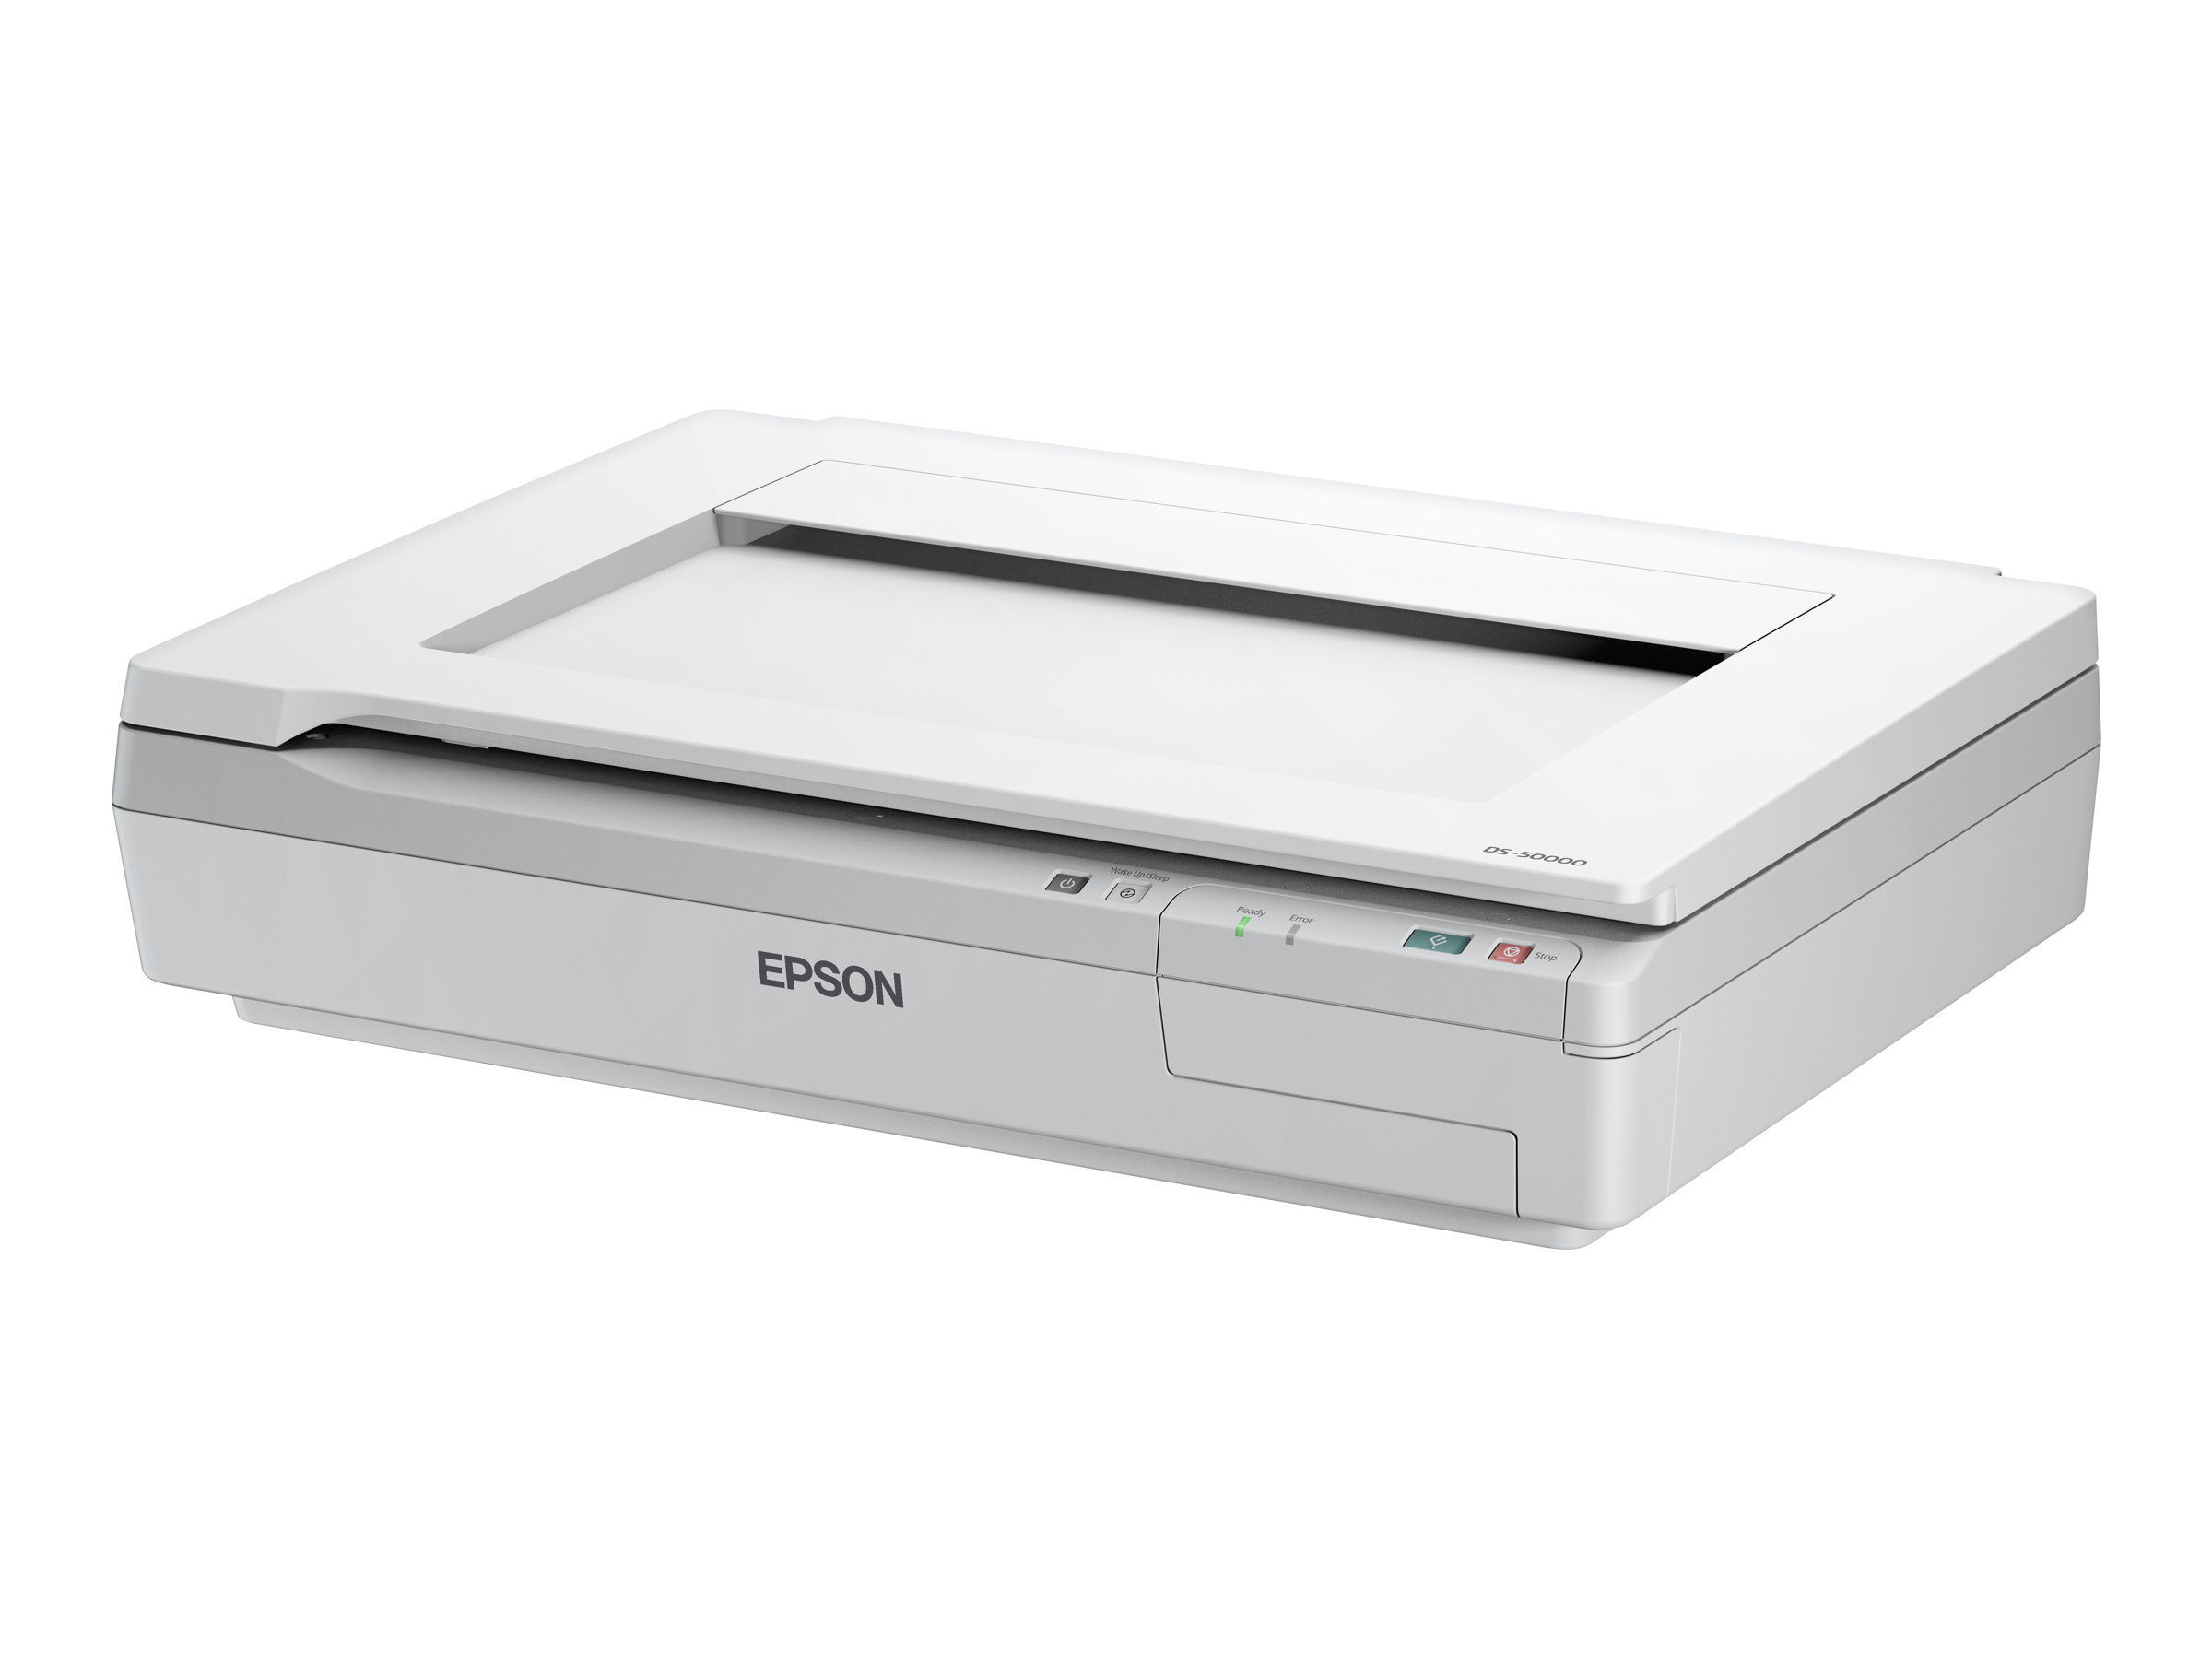 Epson WorkForce DS-50000 - scanner de documents A3 - 600 ppp x 600 ppp - 4ppm